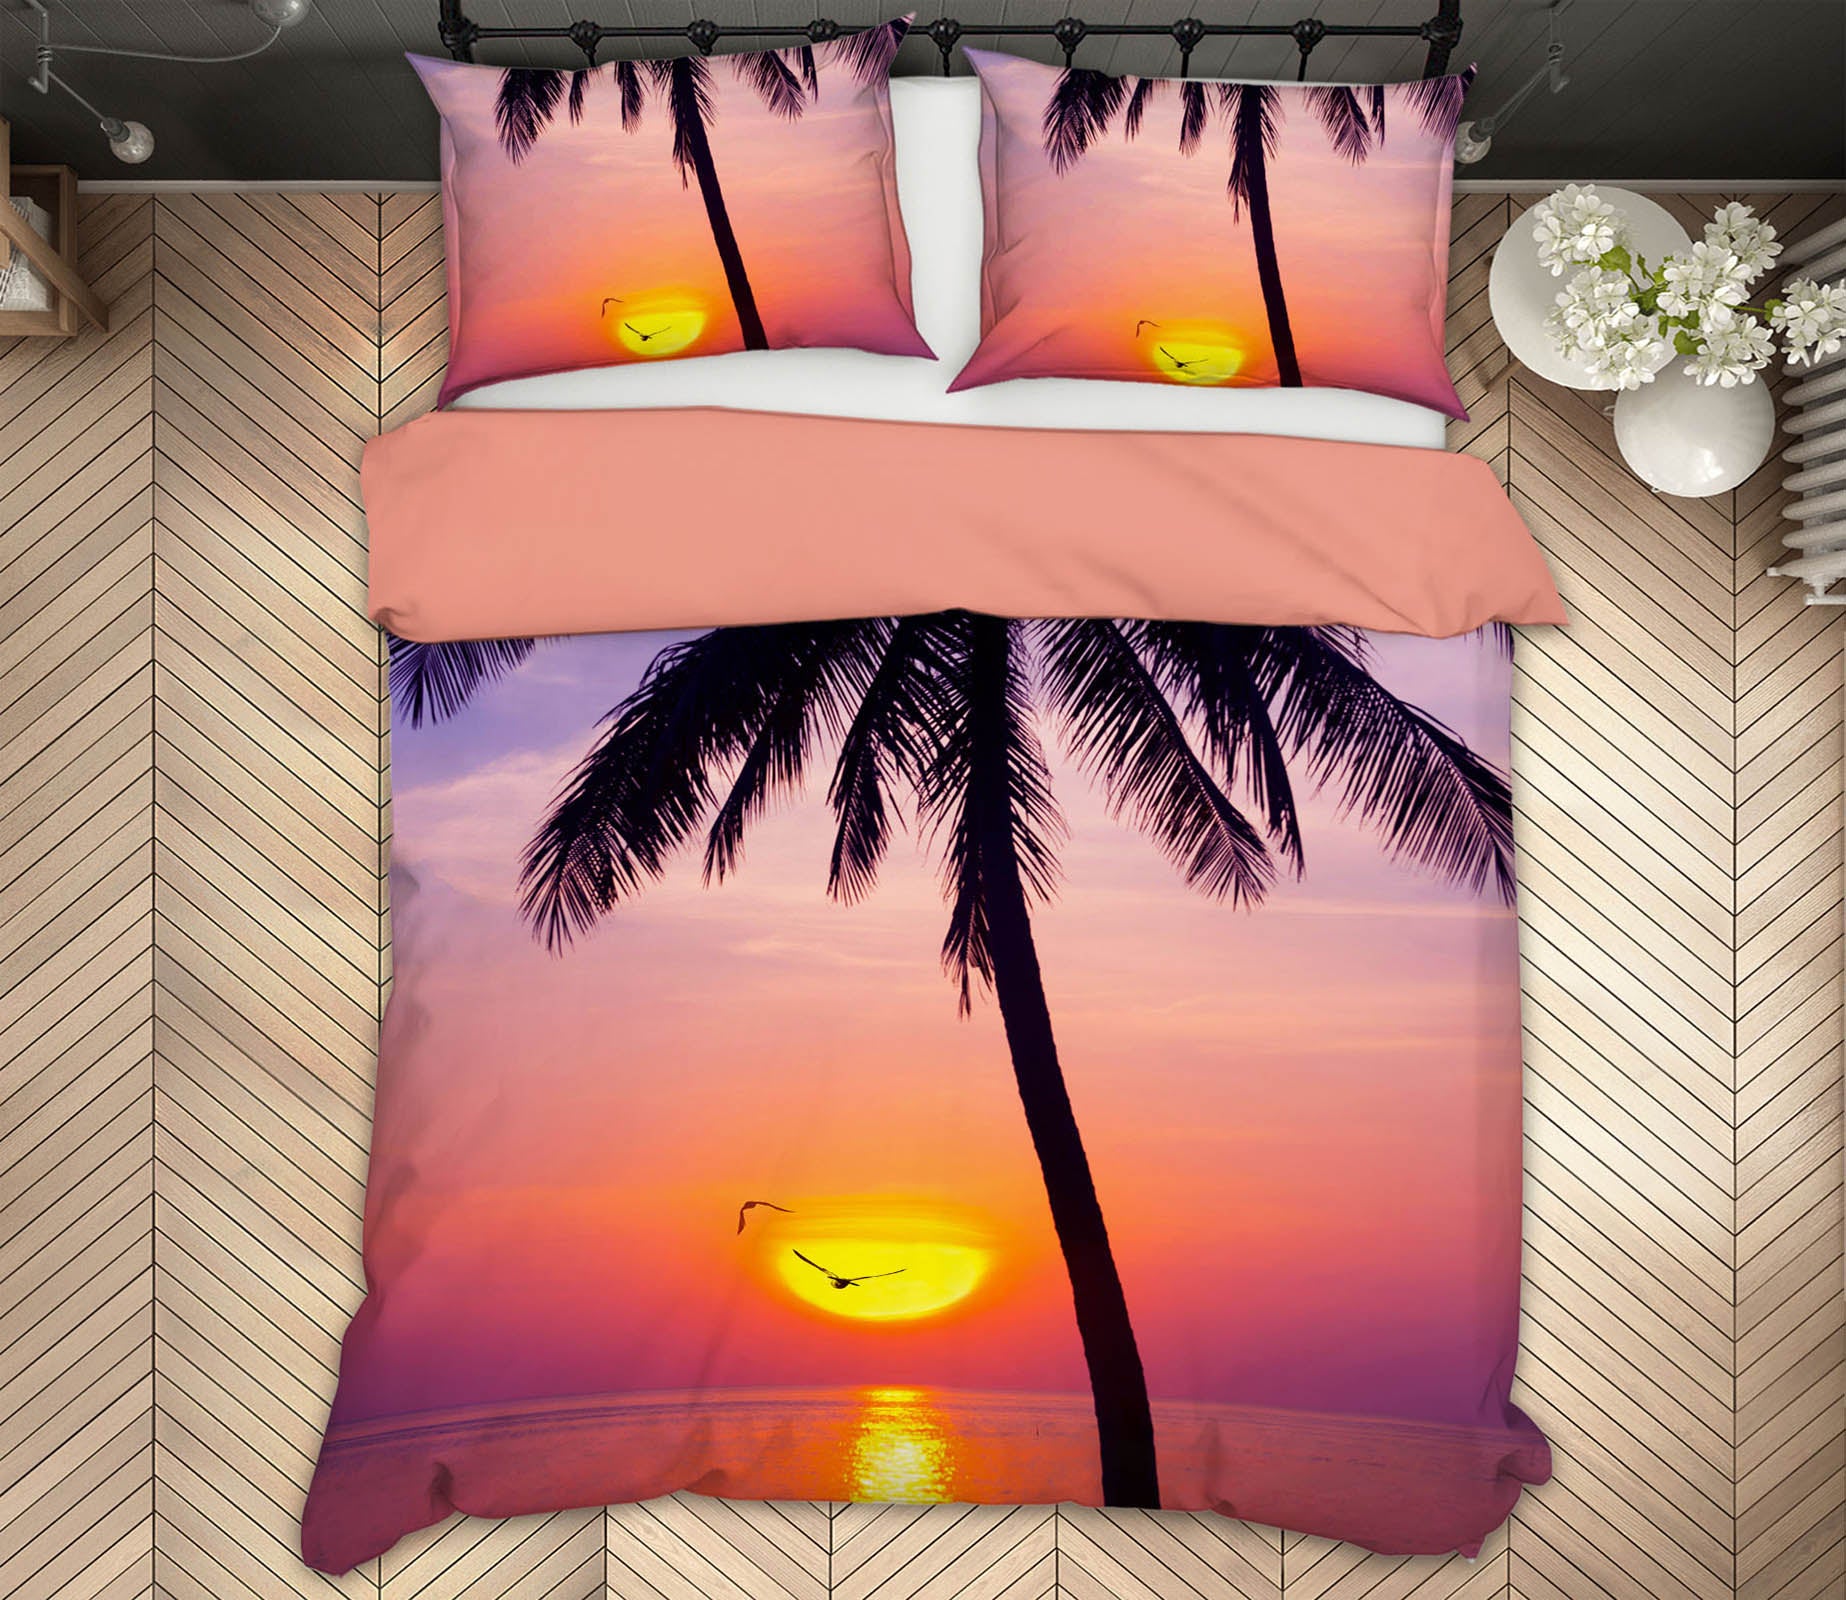 3D Sunset On The Beach 144 Marco Carmassi Bedding Bed Pillowcases Quilt